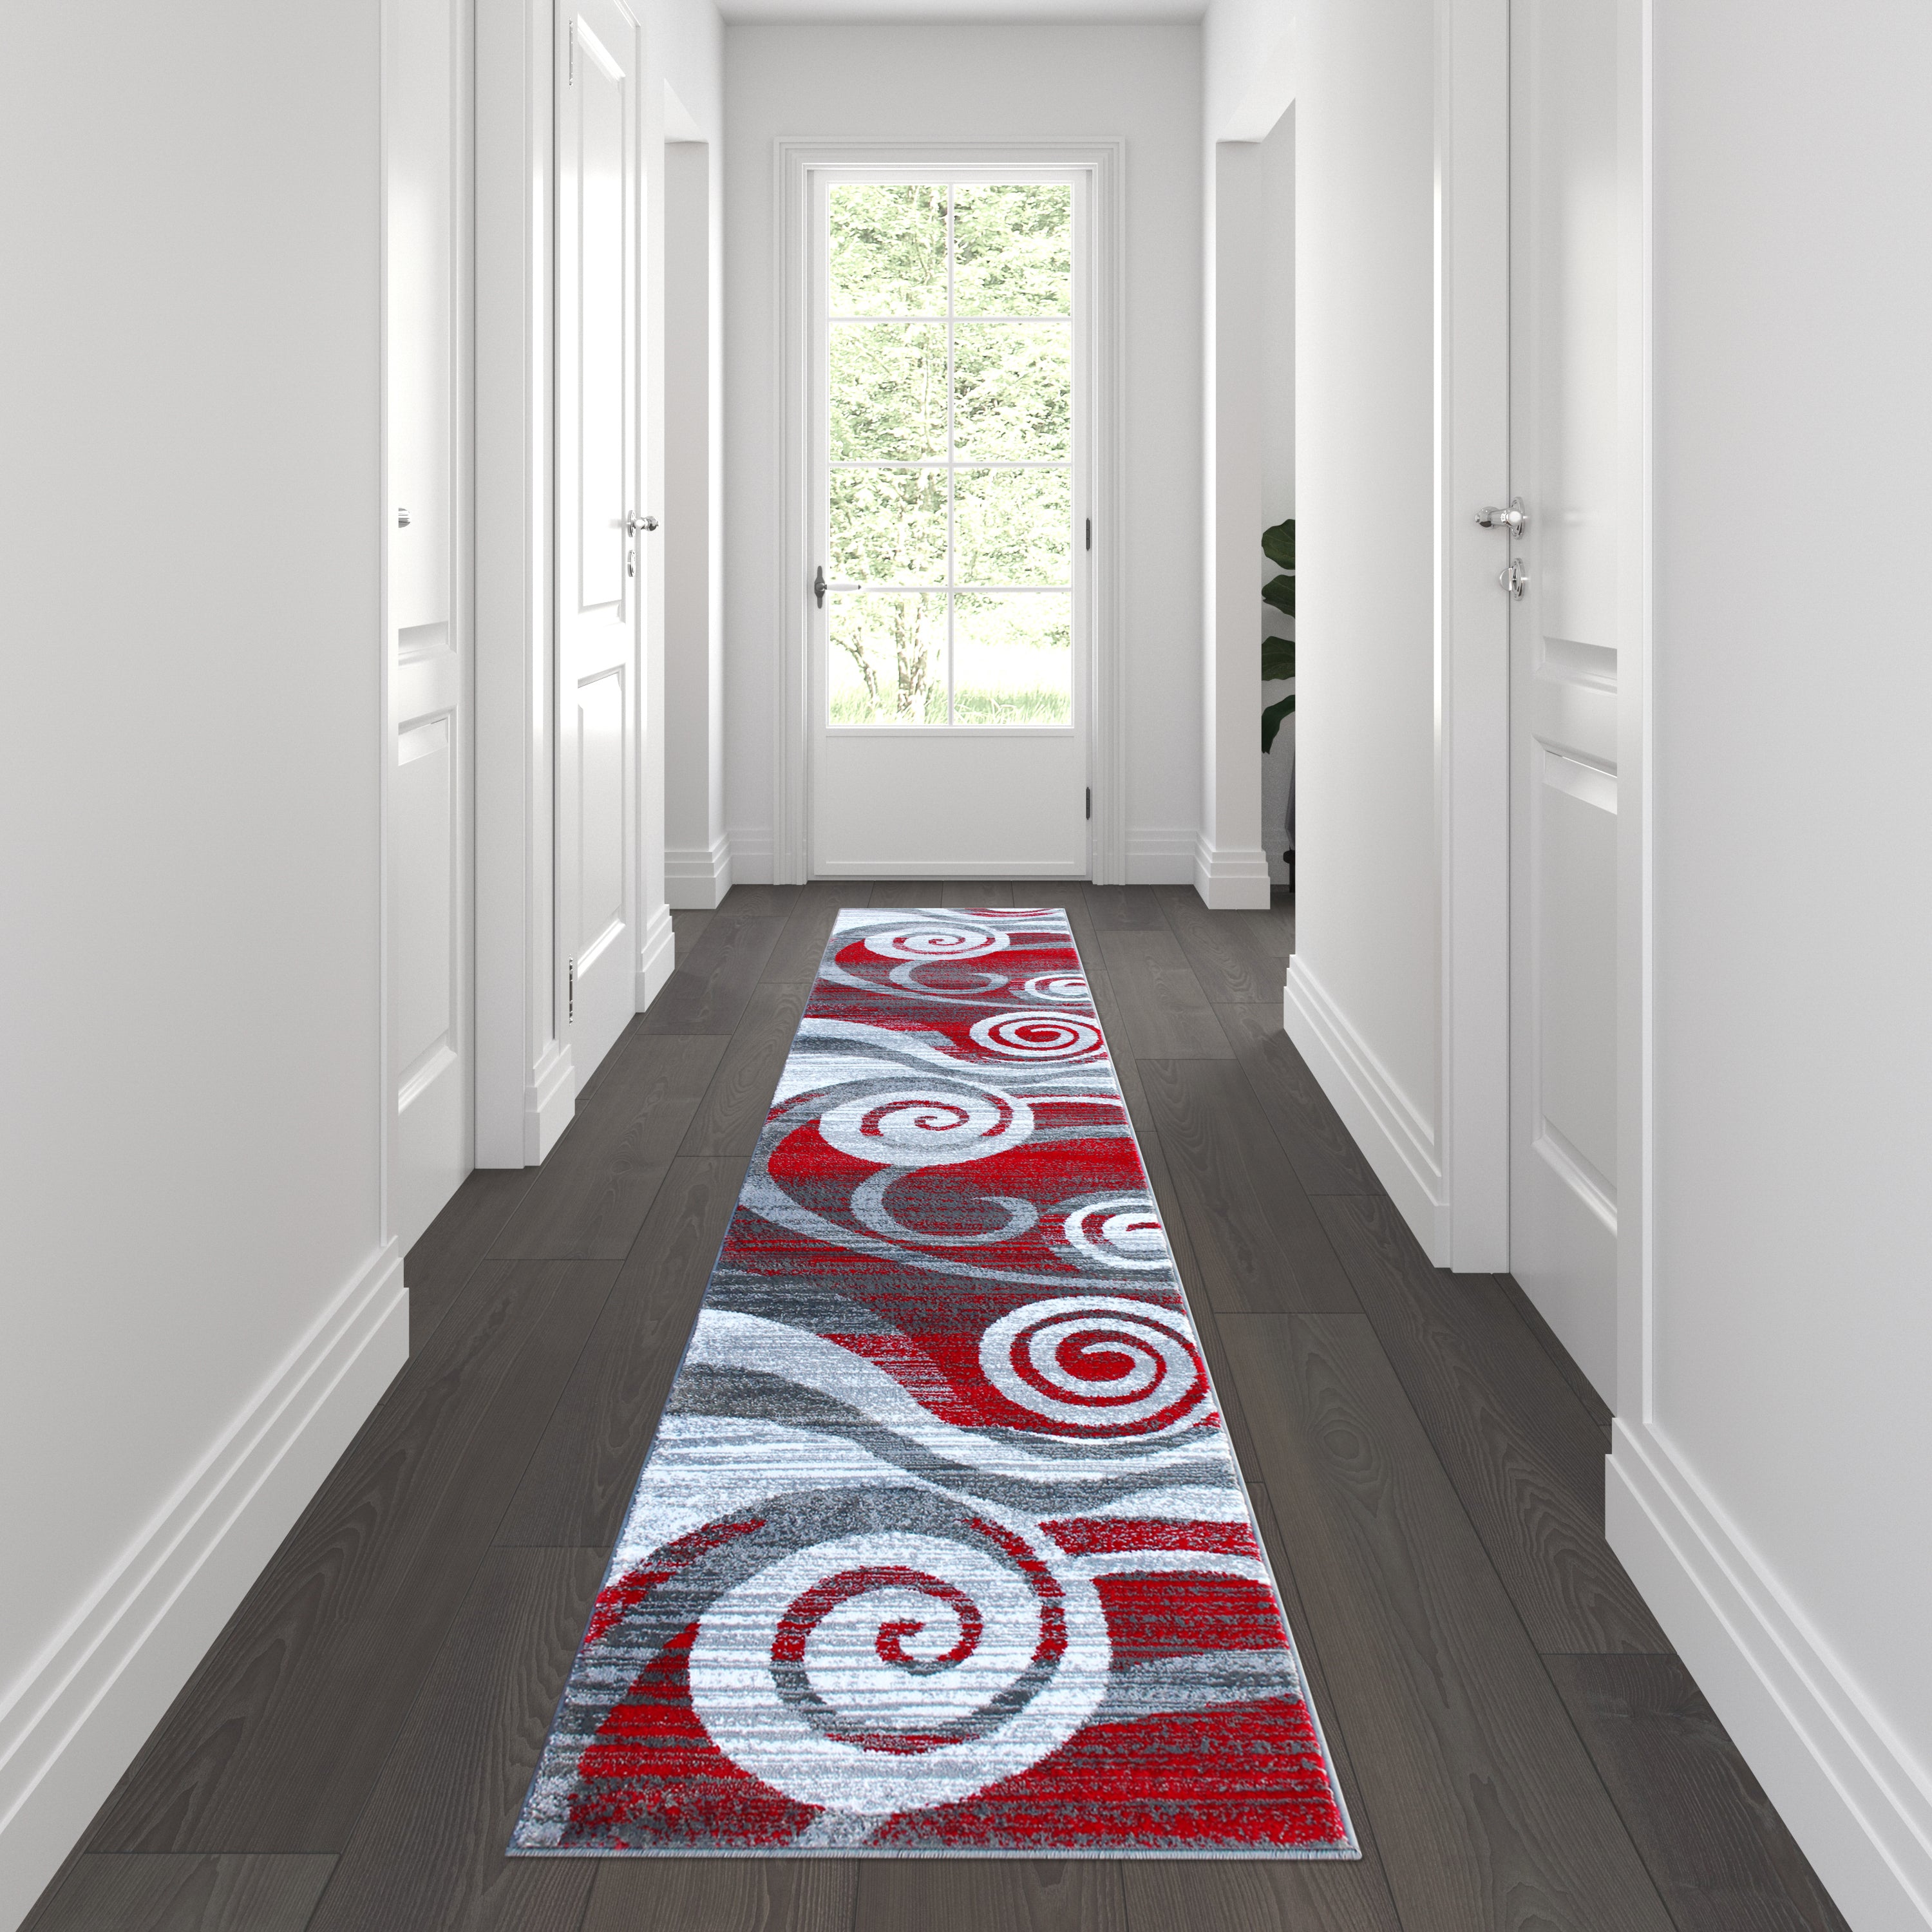 Cirrus Collection Swirl Patterned Olefin Area Rug with Jute Backing for Entryway, Living Room, Bedroom-Area Rug-Flash Furniture-Wall2Wall Furnishings